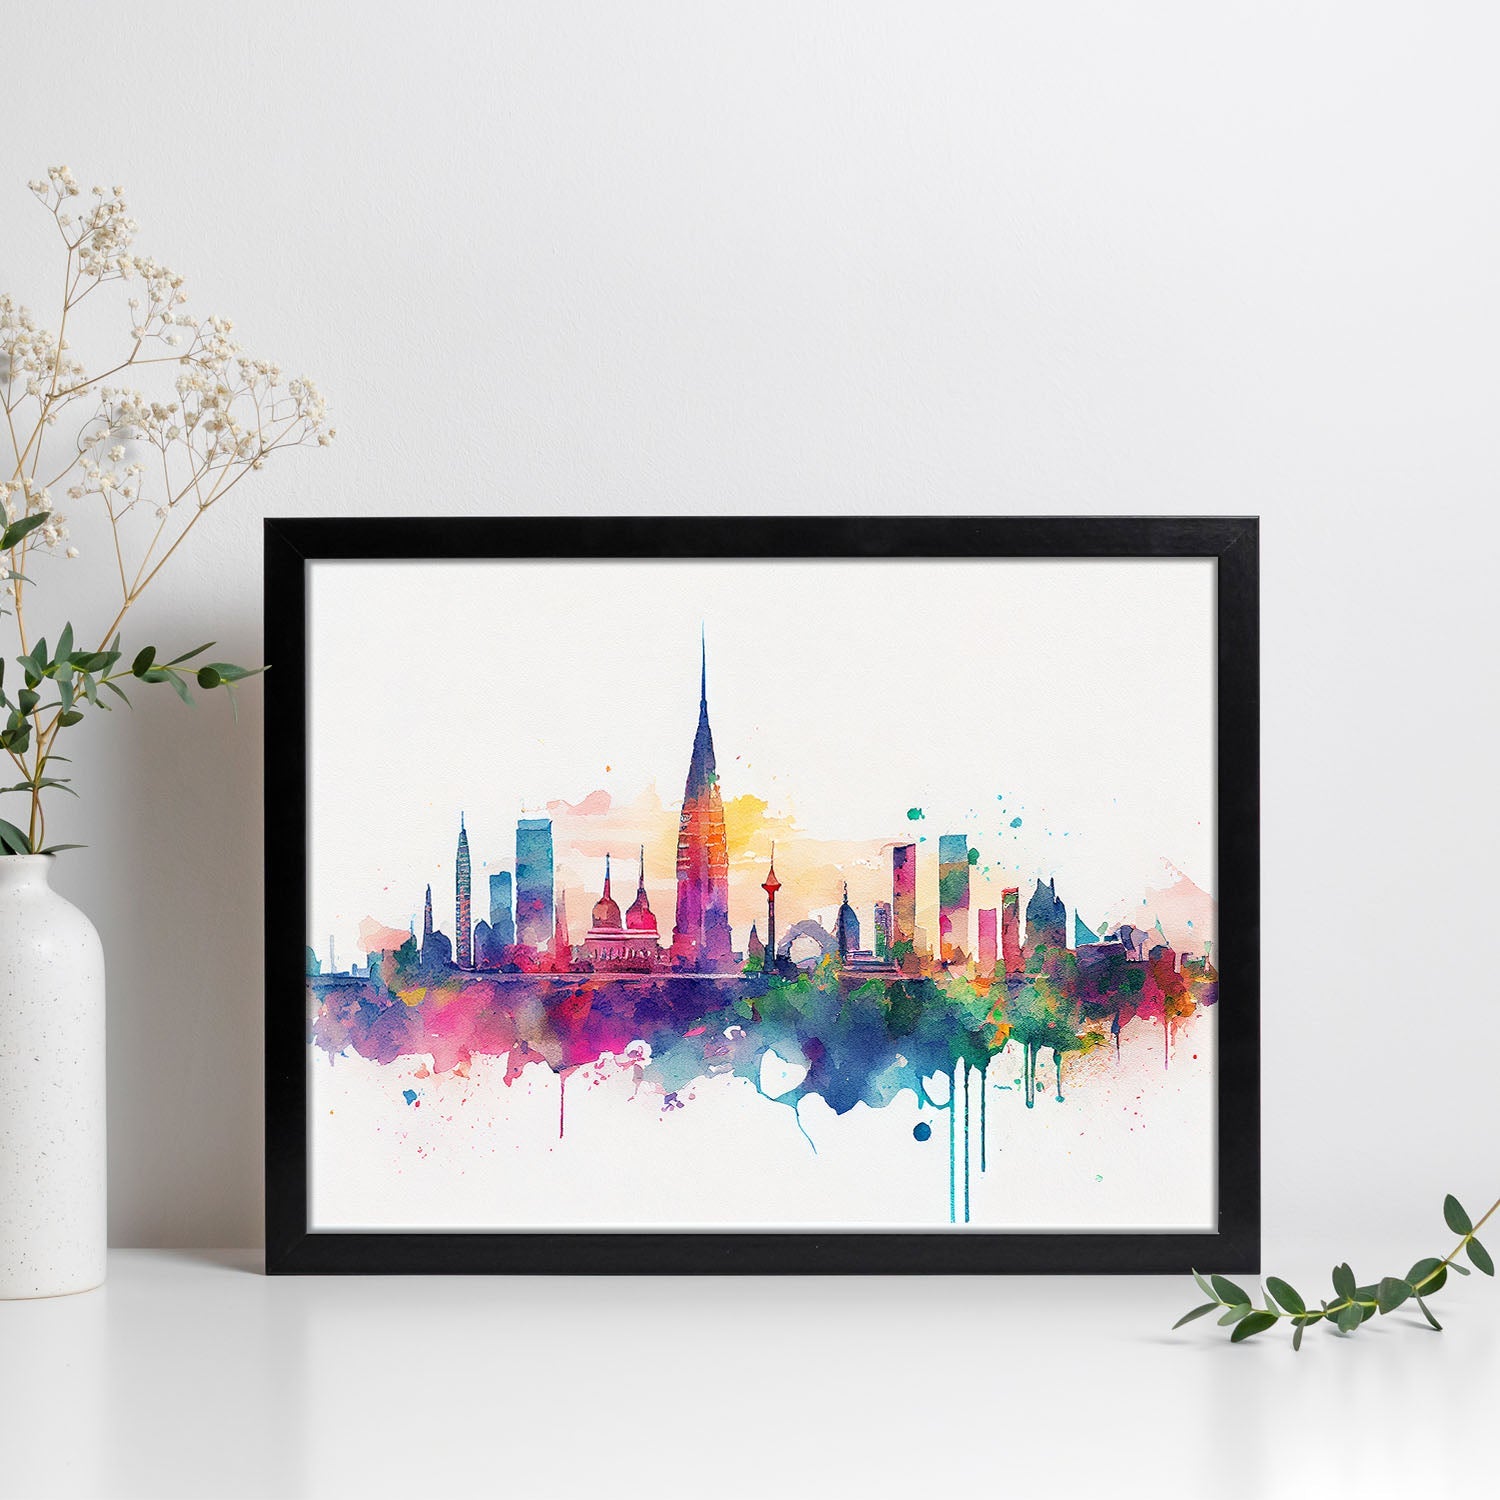 Nacnic watercolor of a skyline of the city of Bangkok. Aesthetic Wall Art Prints for Bedroom or Living Room Design.-Artwork-Nacnic-A4-Sin Marco-Nacnic Estudio SL